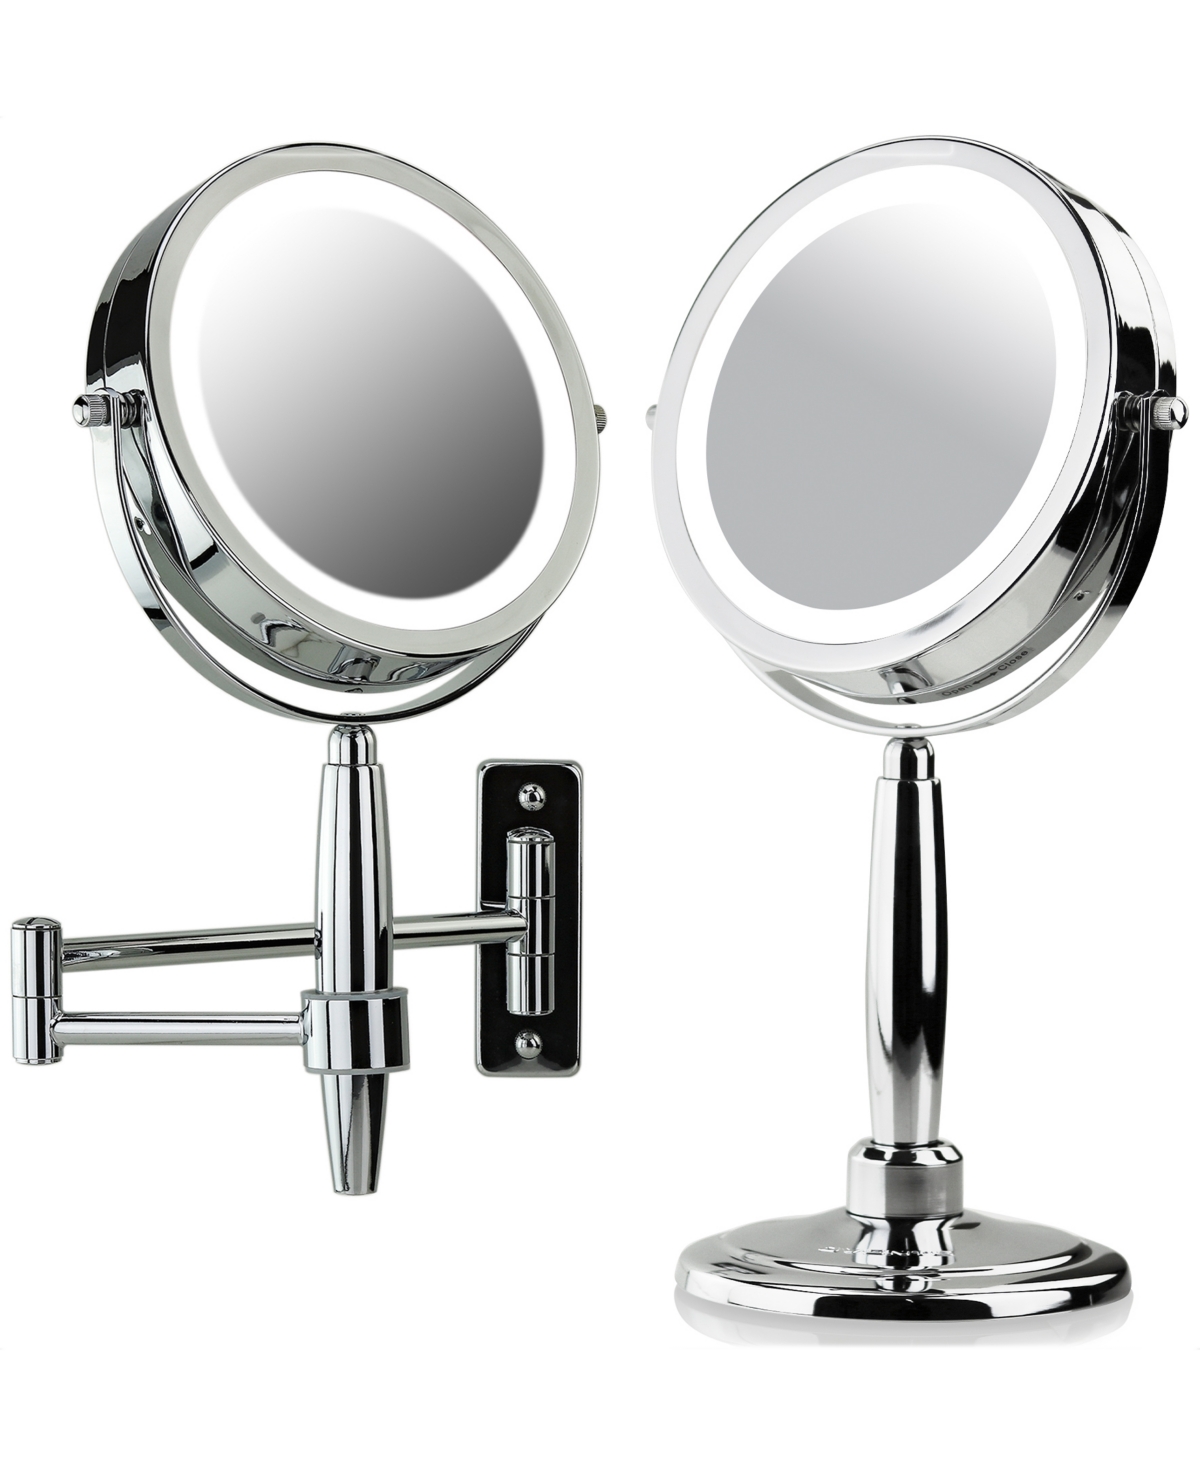 Lighted 3-in-1 Makeup Mirror Tabletop - Chrome